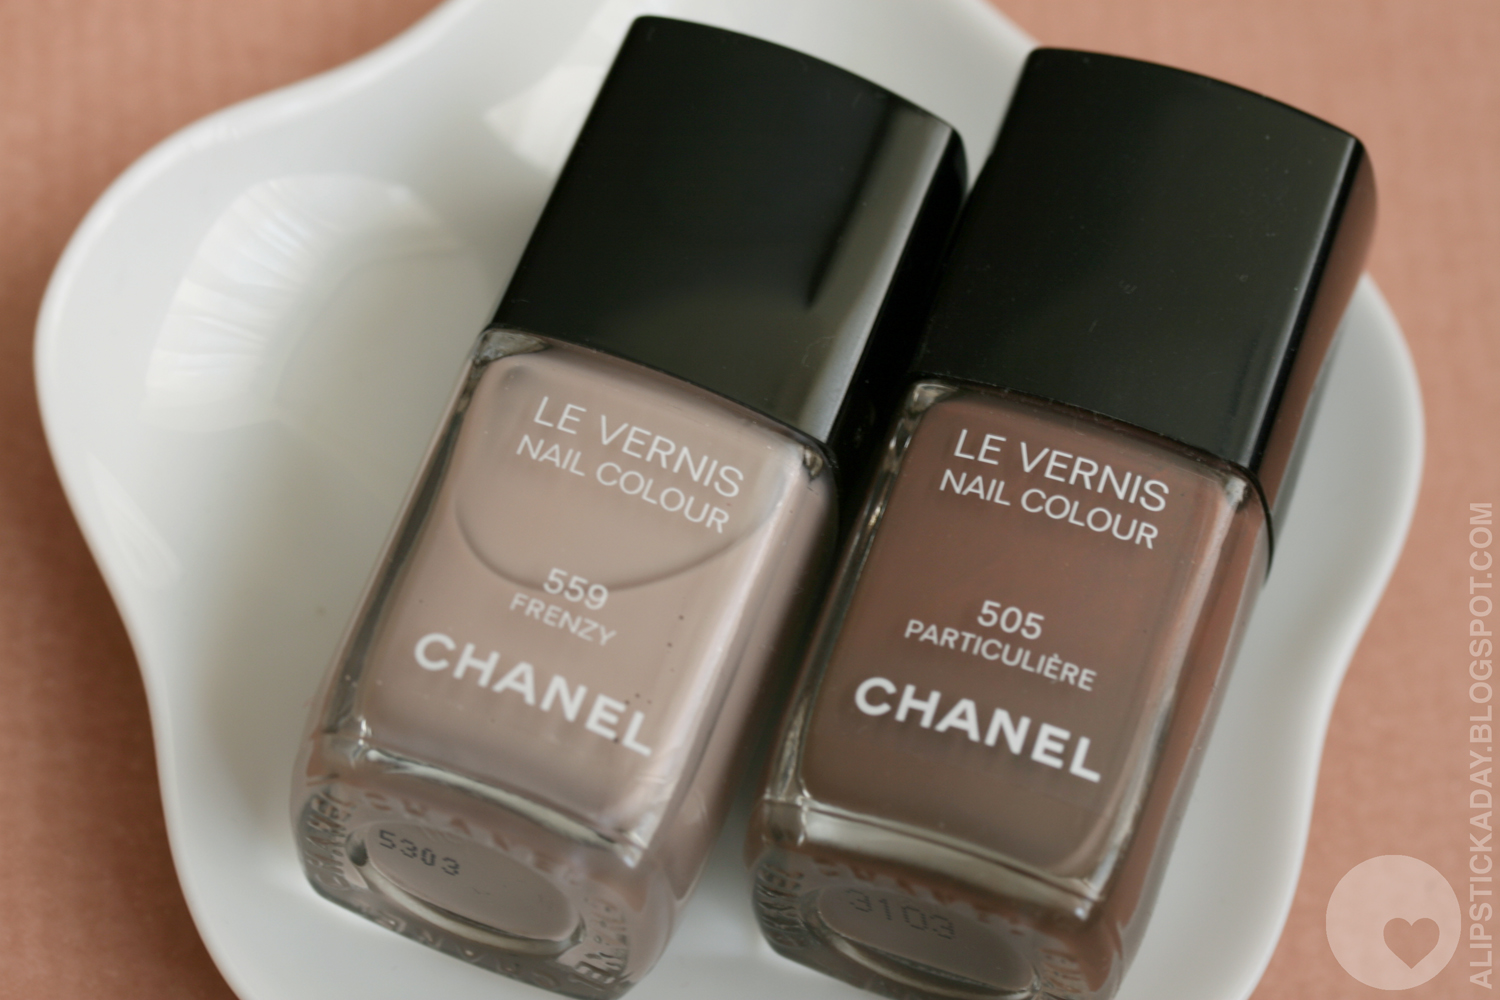 Chanel Le Vernis Longwear Nail Colour in "Frenzy" 2024 - wide 5